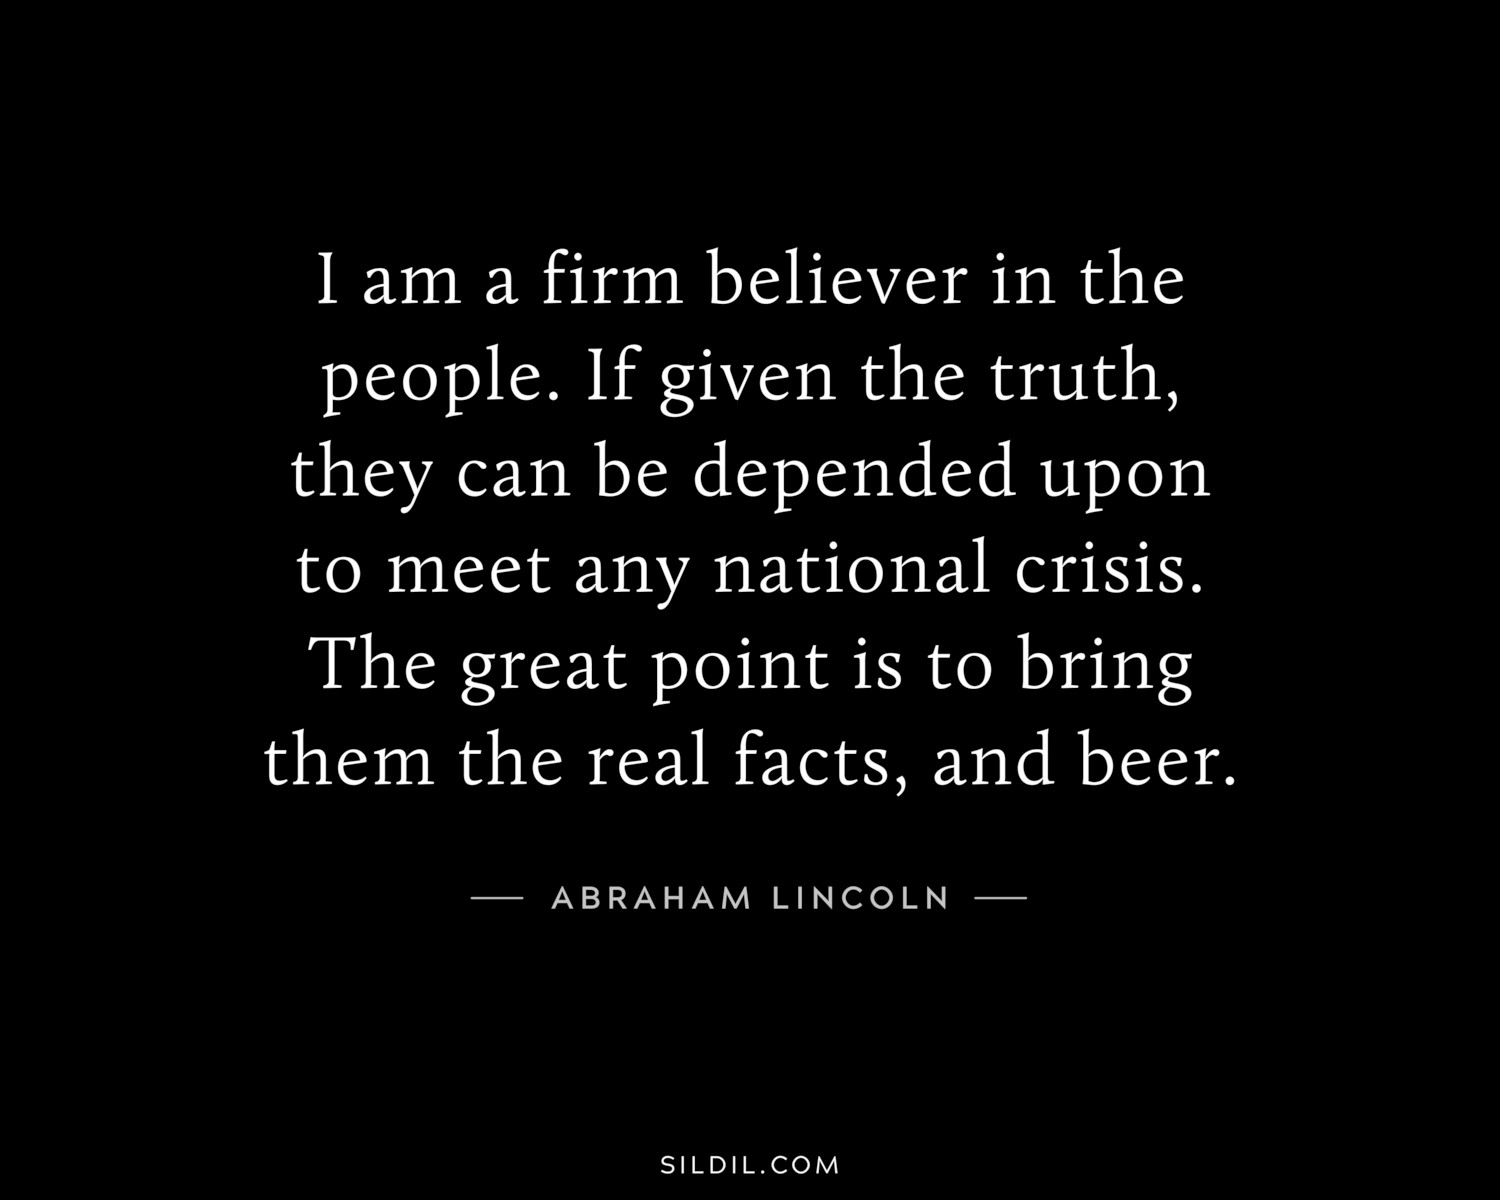 I am a firm believer in the people. If given the truth, they can be depended upon to meet any national crisis. The great point is to bring them the real facts, and beer.